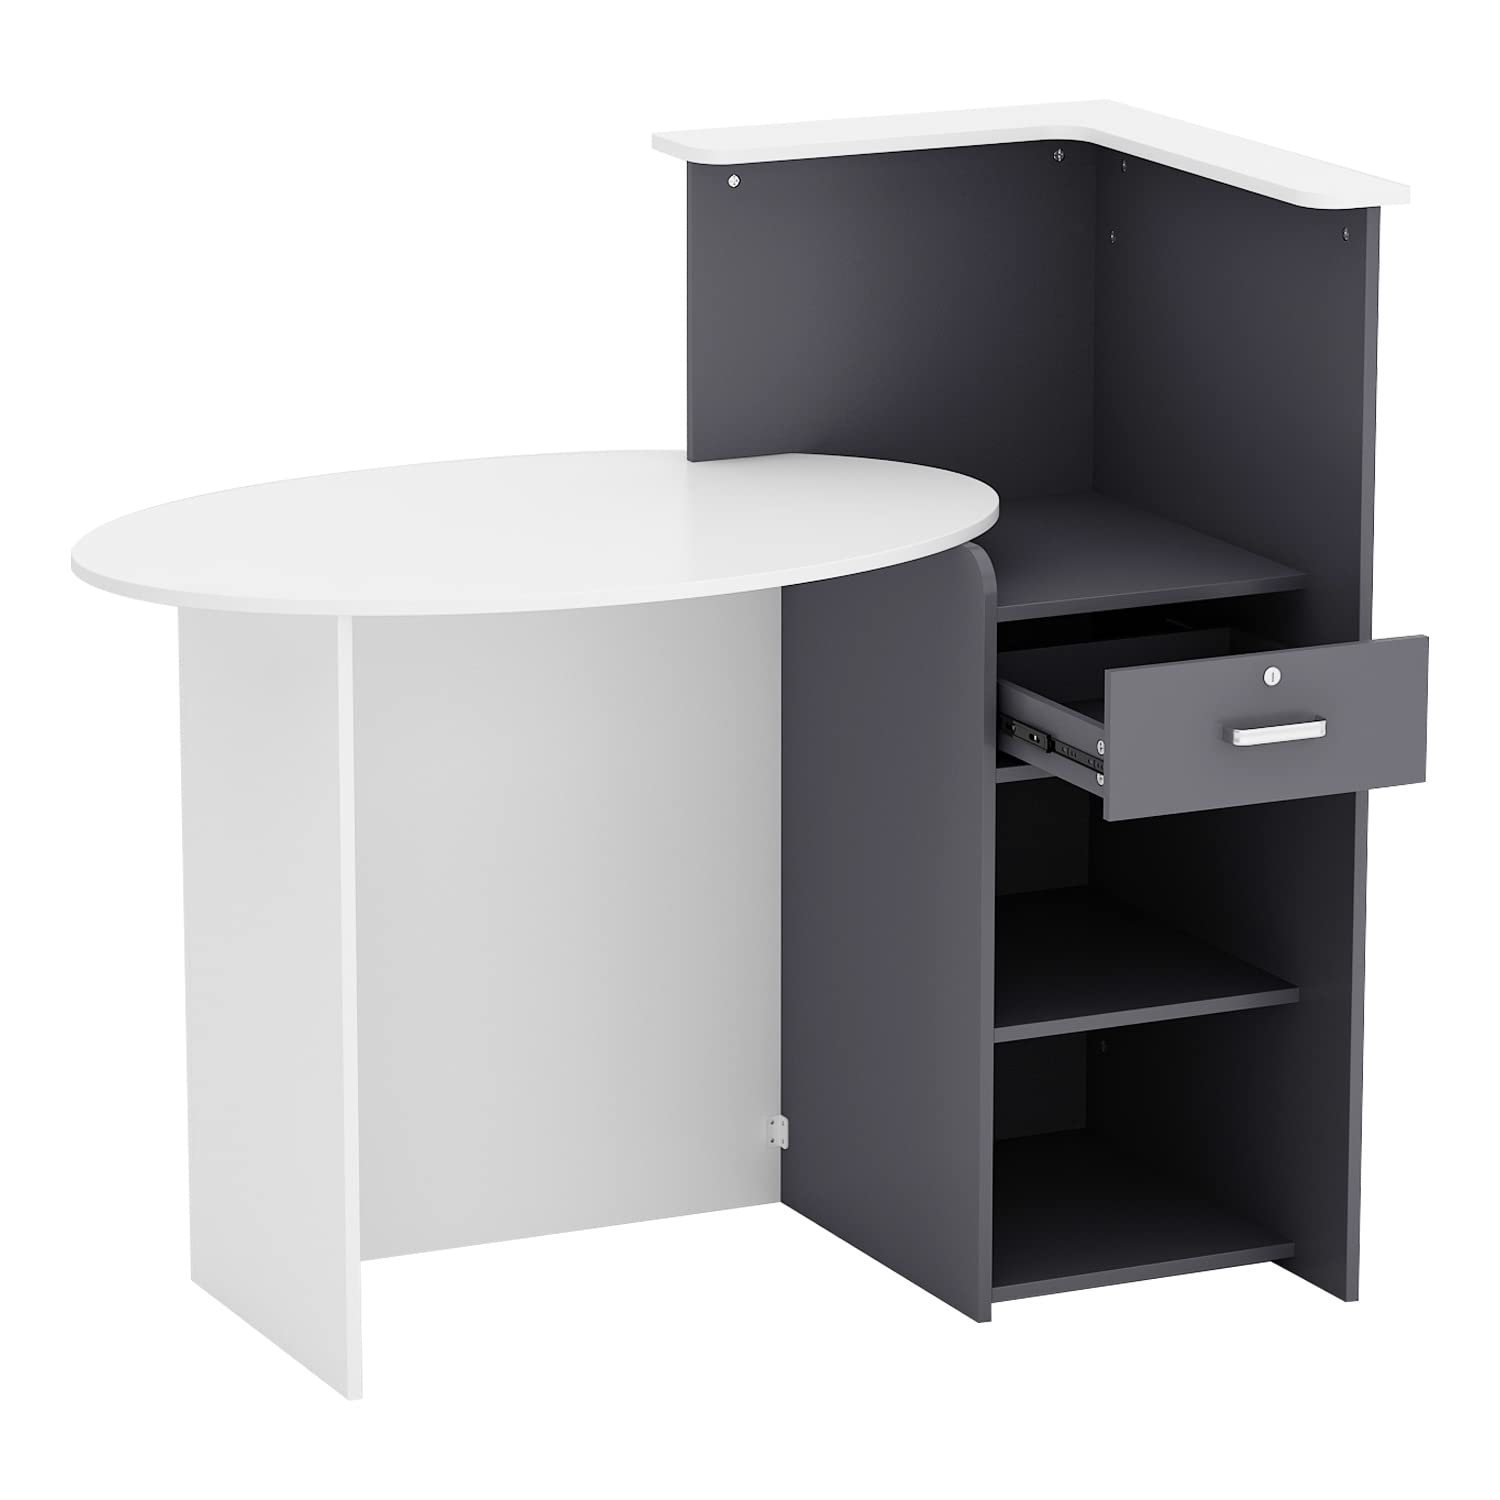 AIEGLE Reception Desk, Front Counter Desk with Lockable Drawers, for Salon Reception Room Checkout Office, White Round Table & Dark Grey Counter (50" L x 23.6" W x 43.3" H)